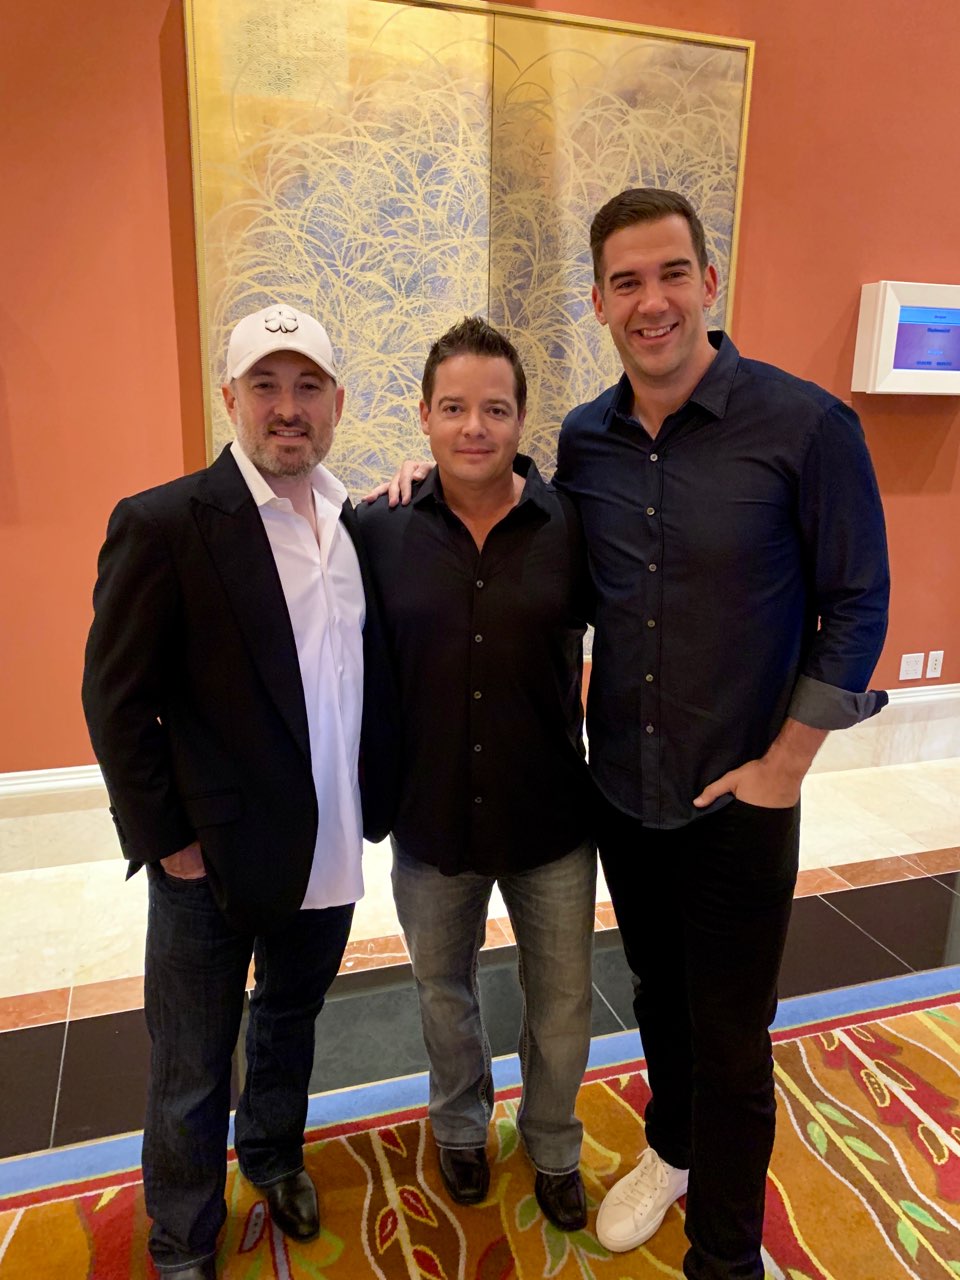 Josh Bezoni at a Las Vegas award ceremony with longtime friends Mike Dillard and Lewis Howes